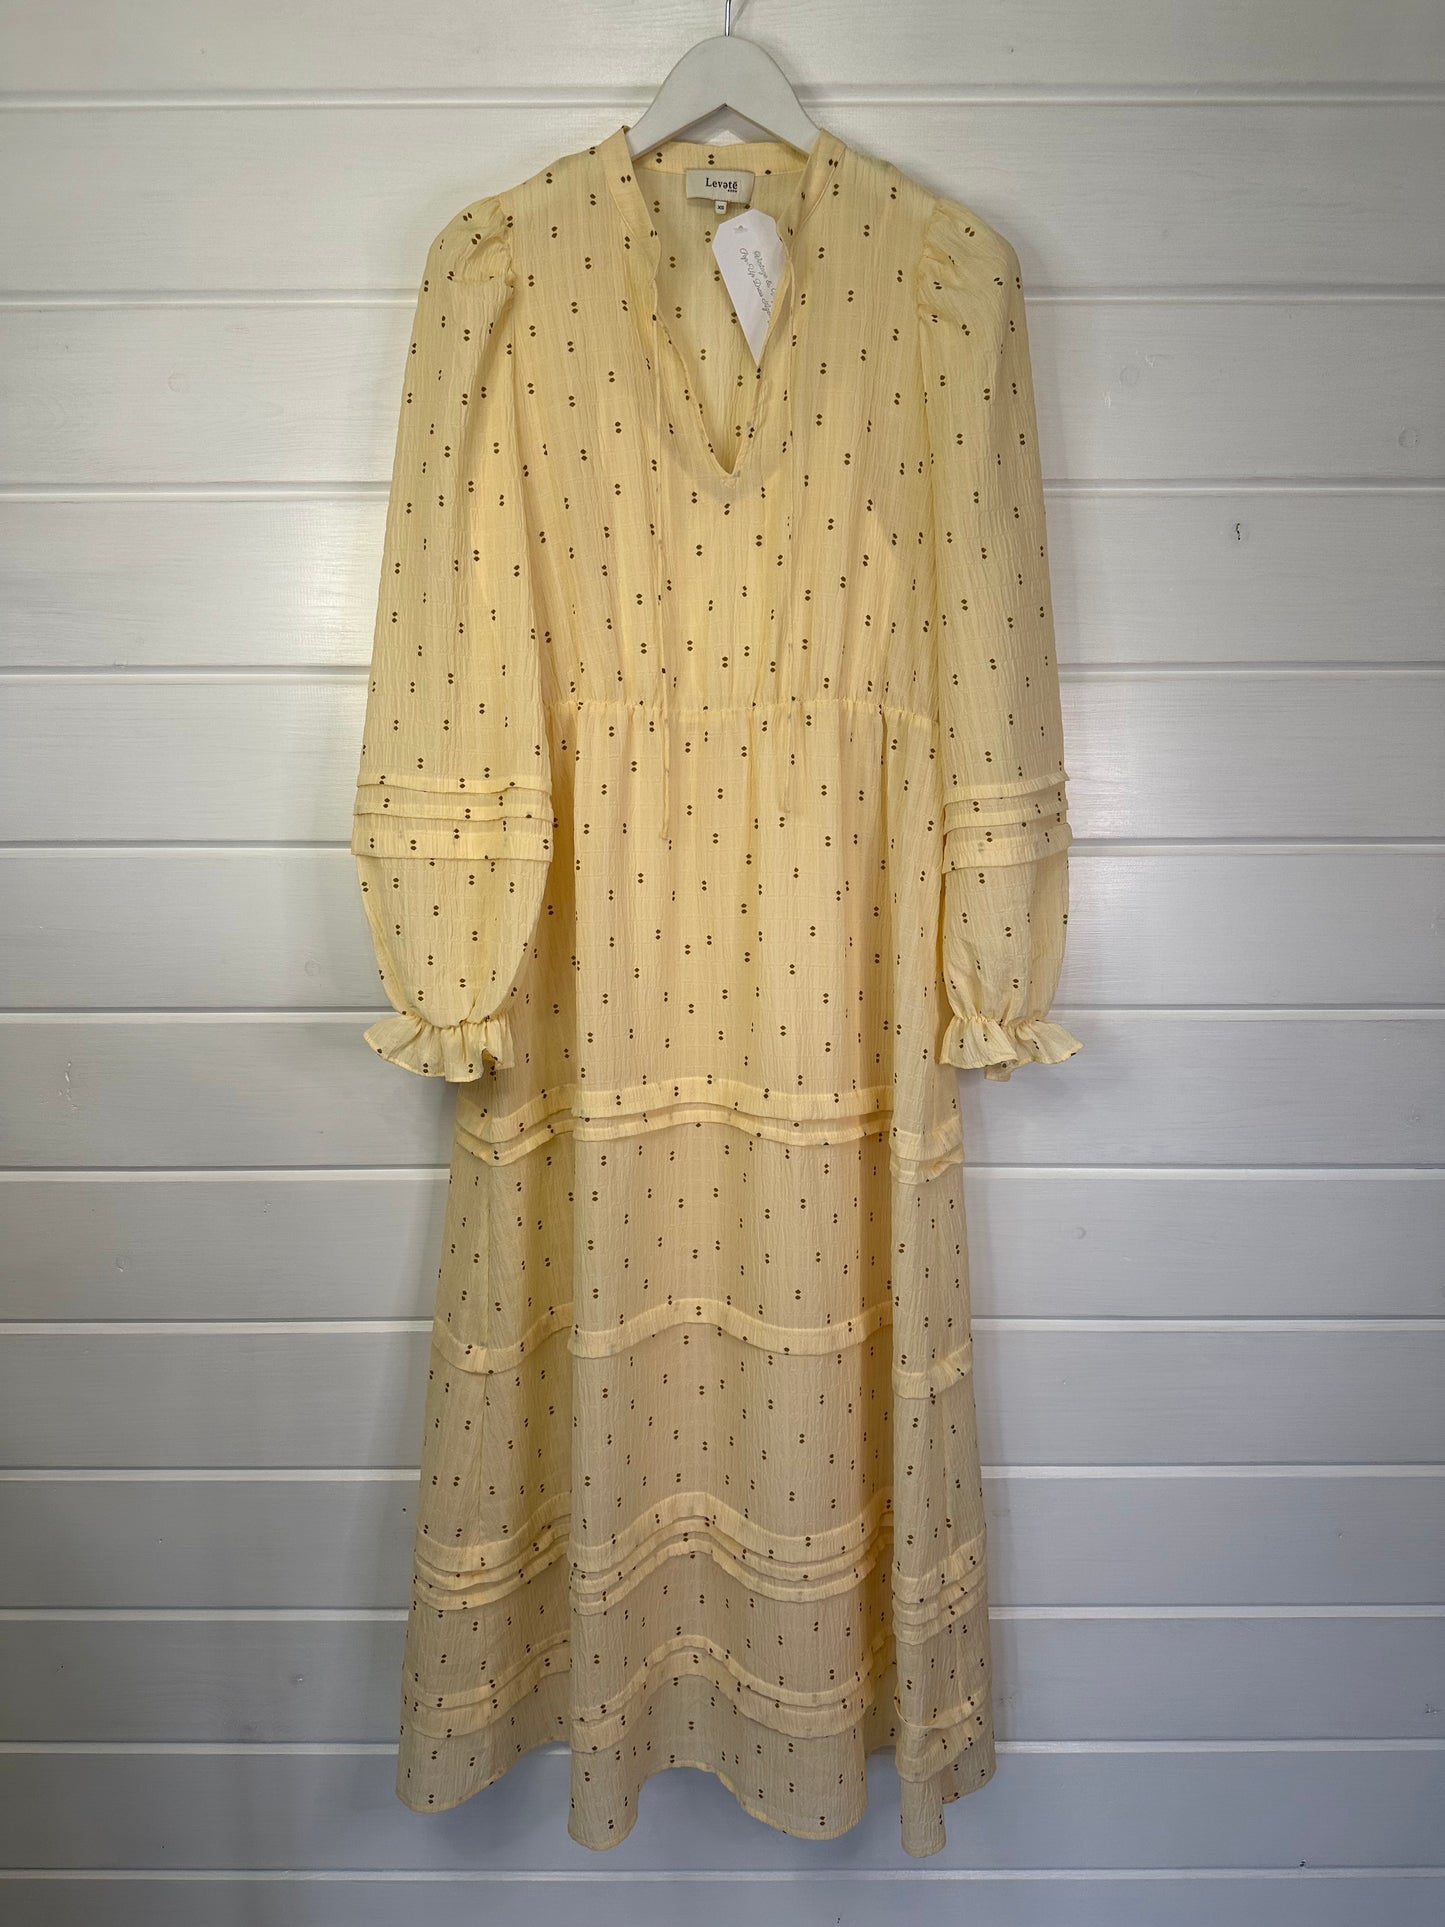 Levete Room Soft Yellow Dress - Size XSmall